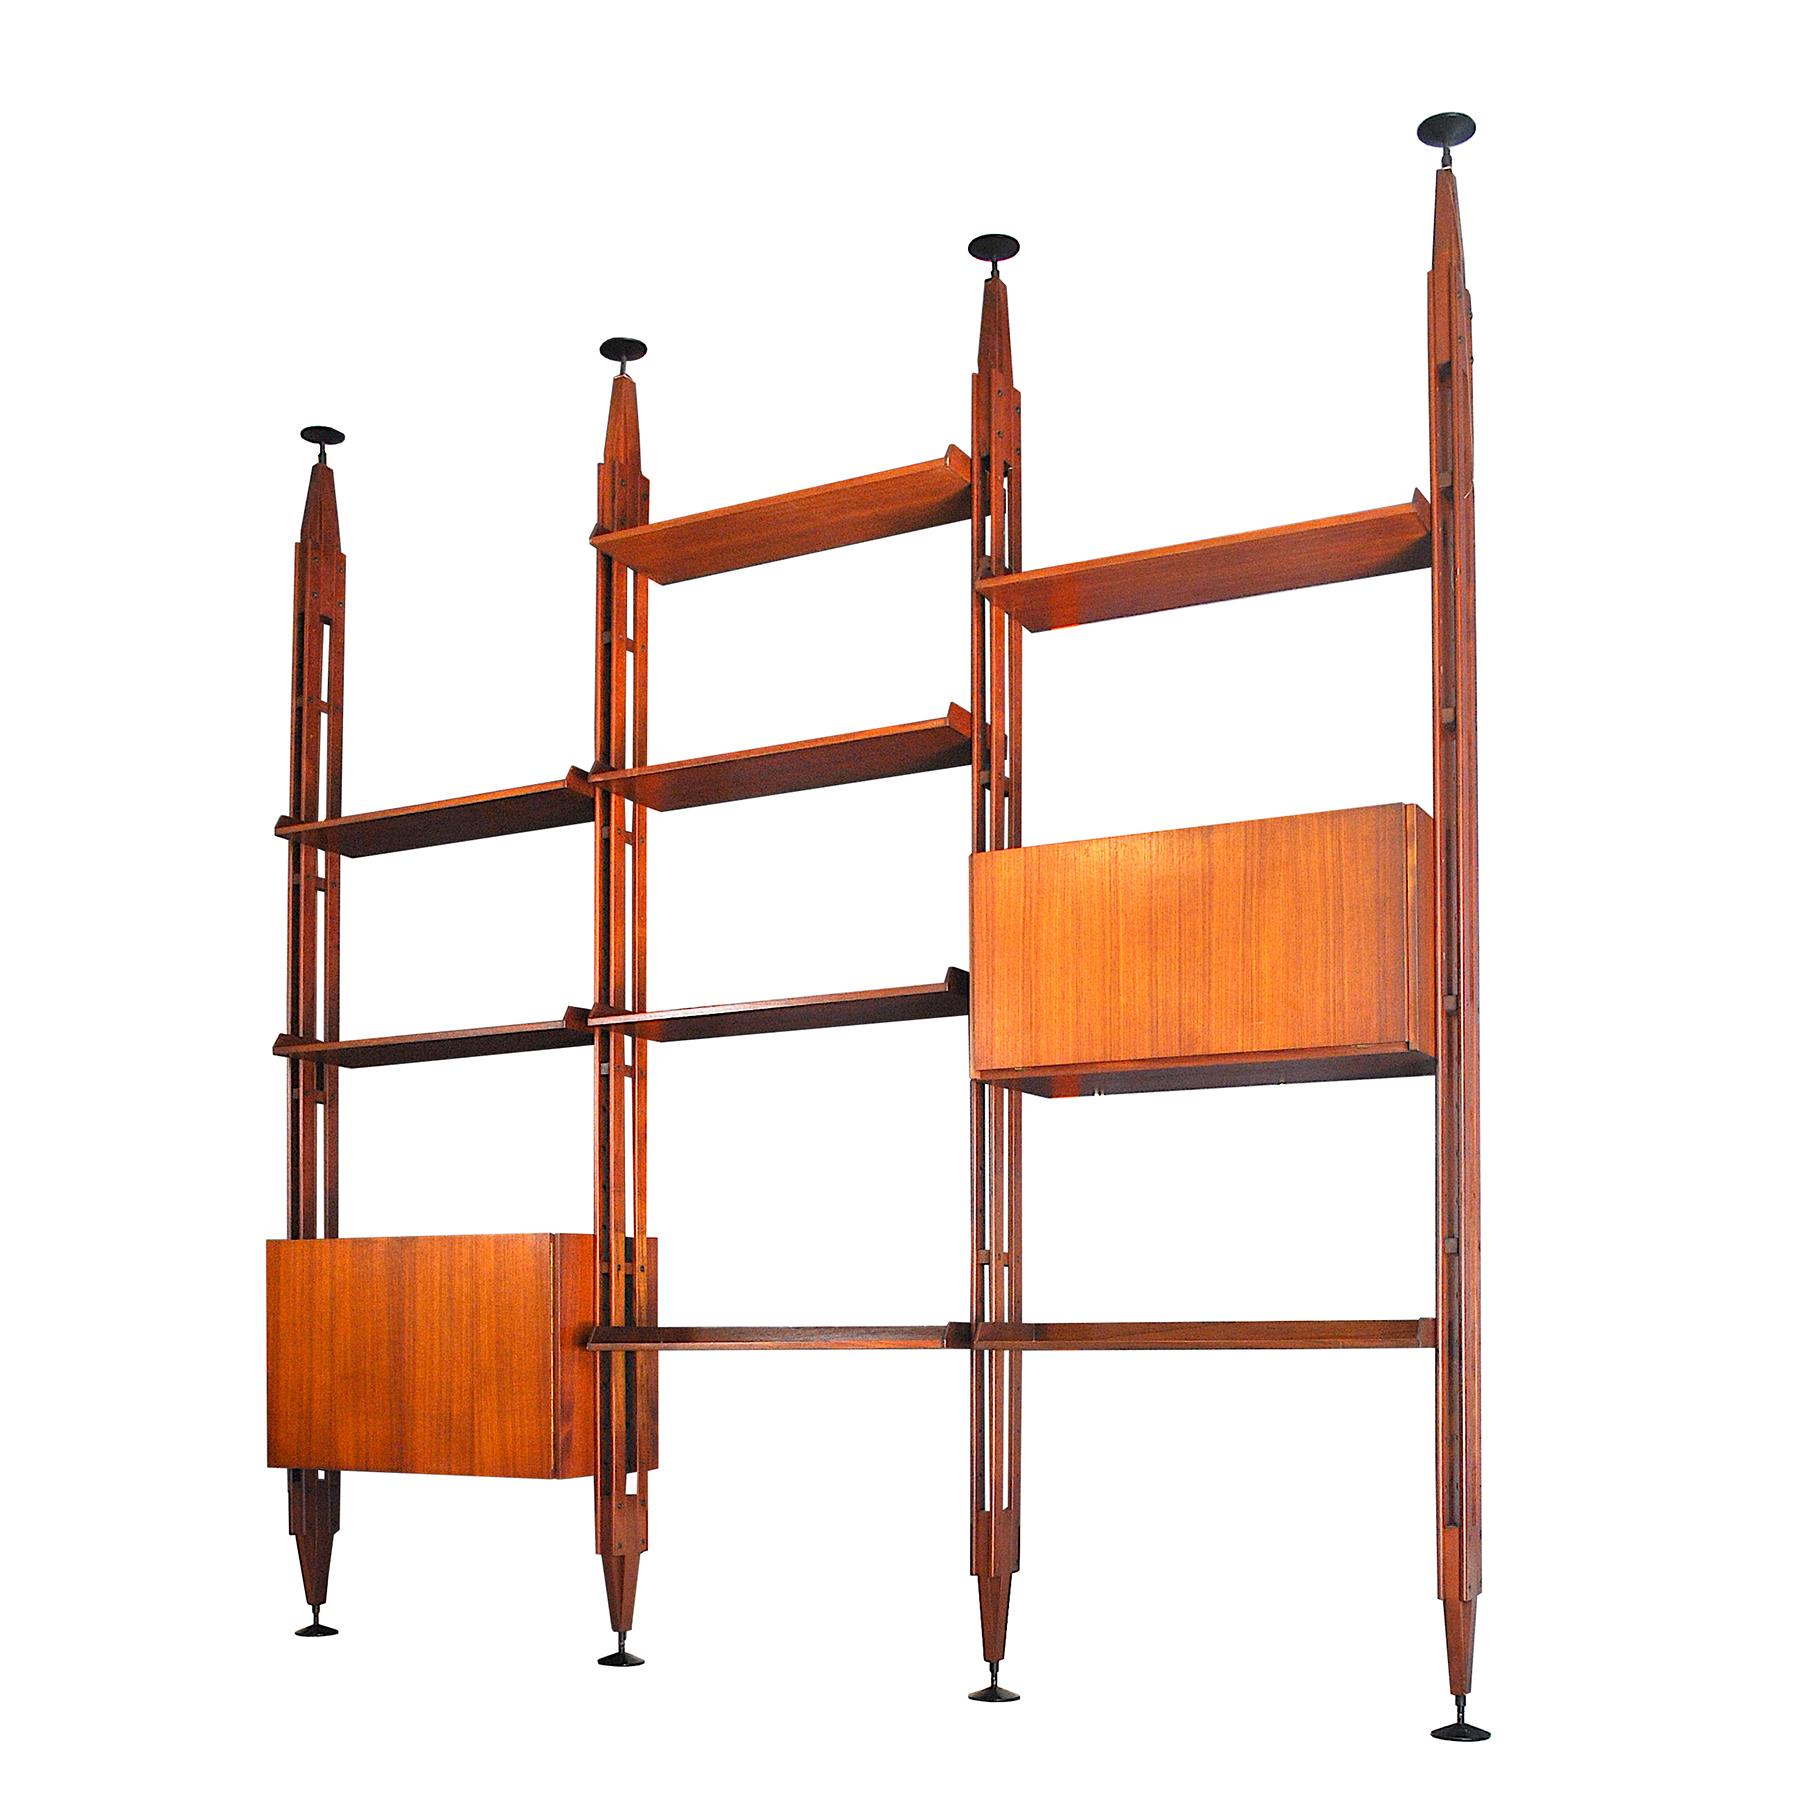 LB7 bookcase with adjustable shelves with uprights fixed to the floor and ceiling designed by Franco Albini in 1956. Production Poggi
Present in the permanent collection of the Muso of the Triennale design in Milan.

The design of this bookcase